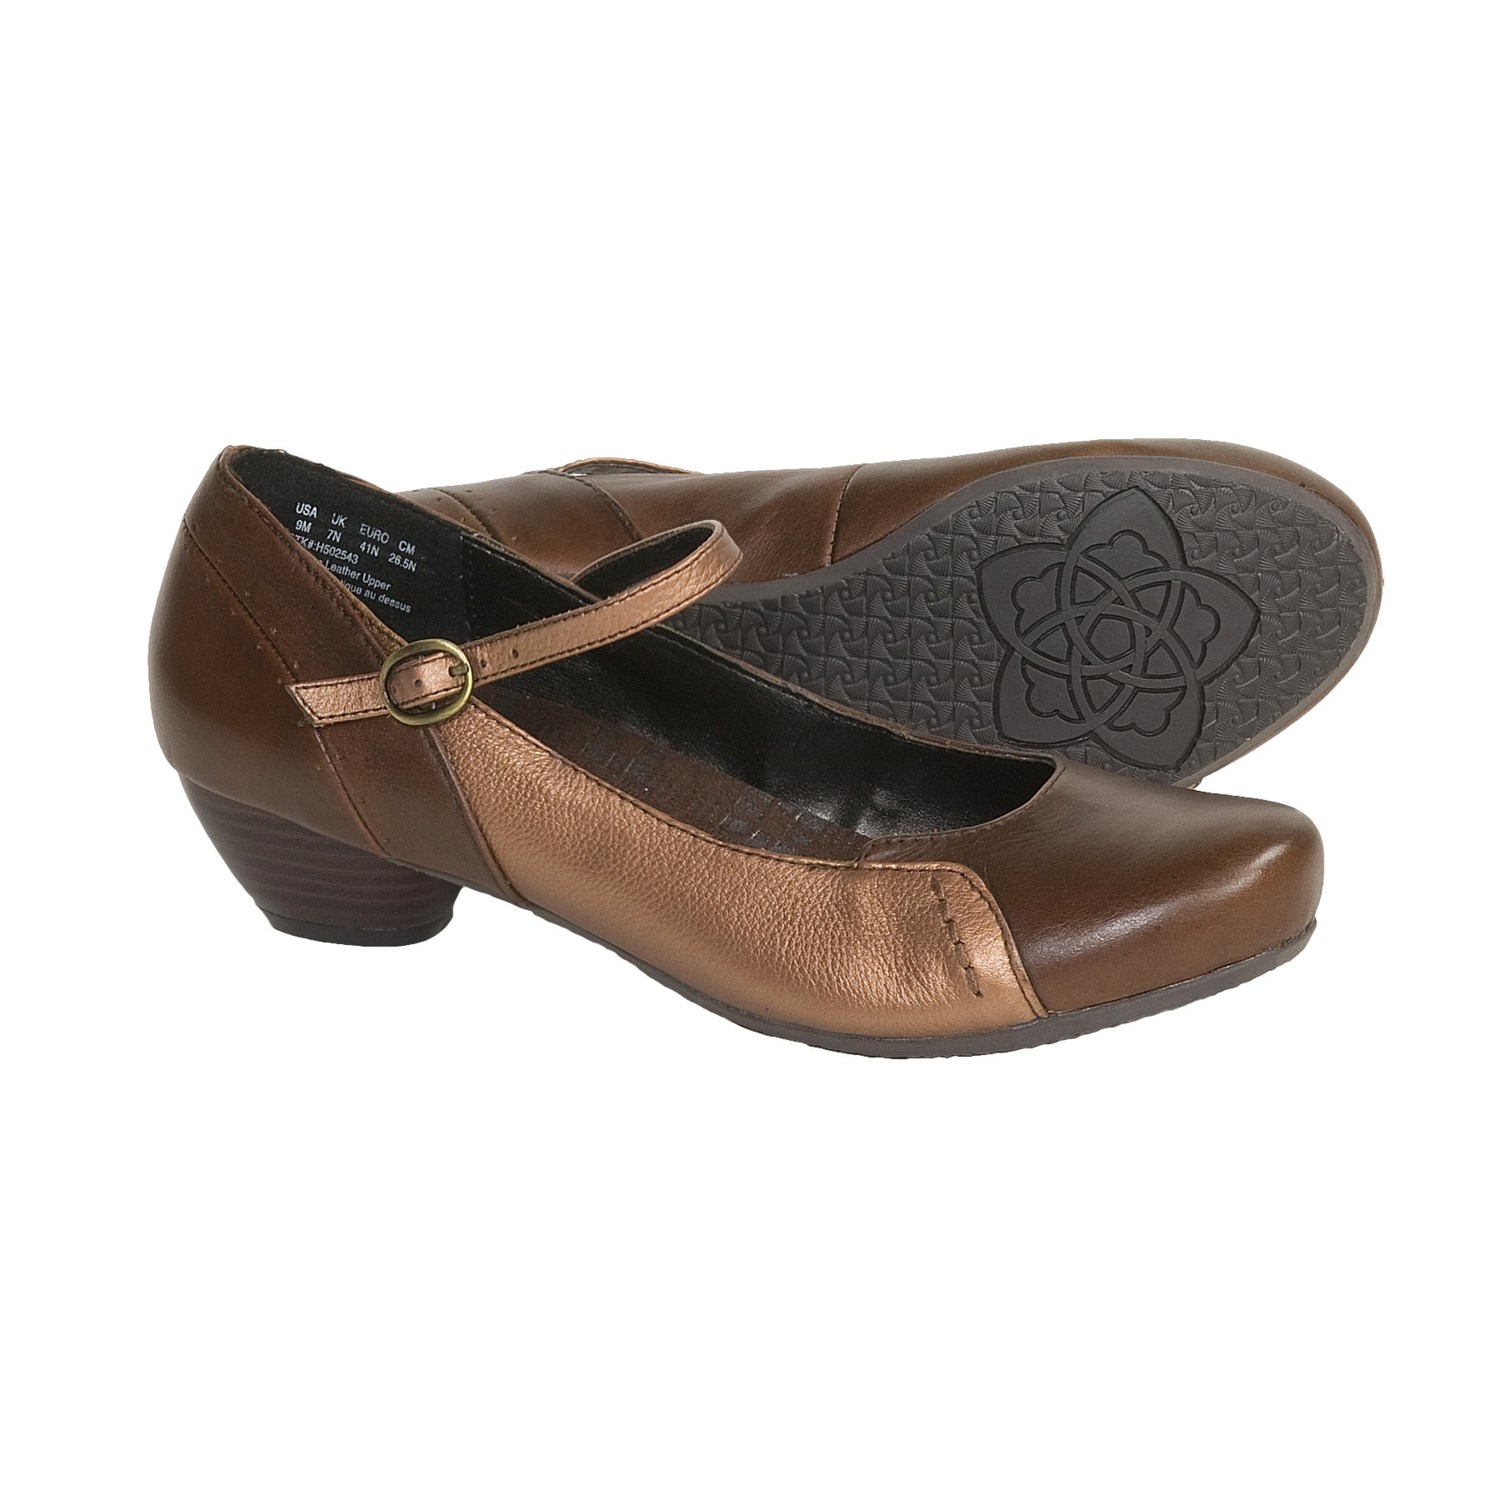 Hush Puppies Jermyn Mary Jane Shoes (For Women) - Save 35%